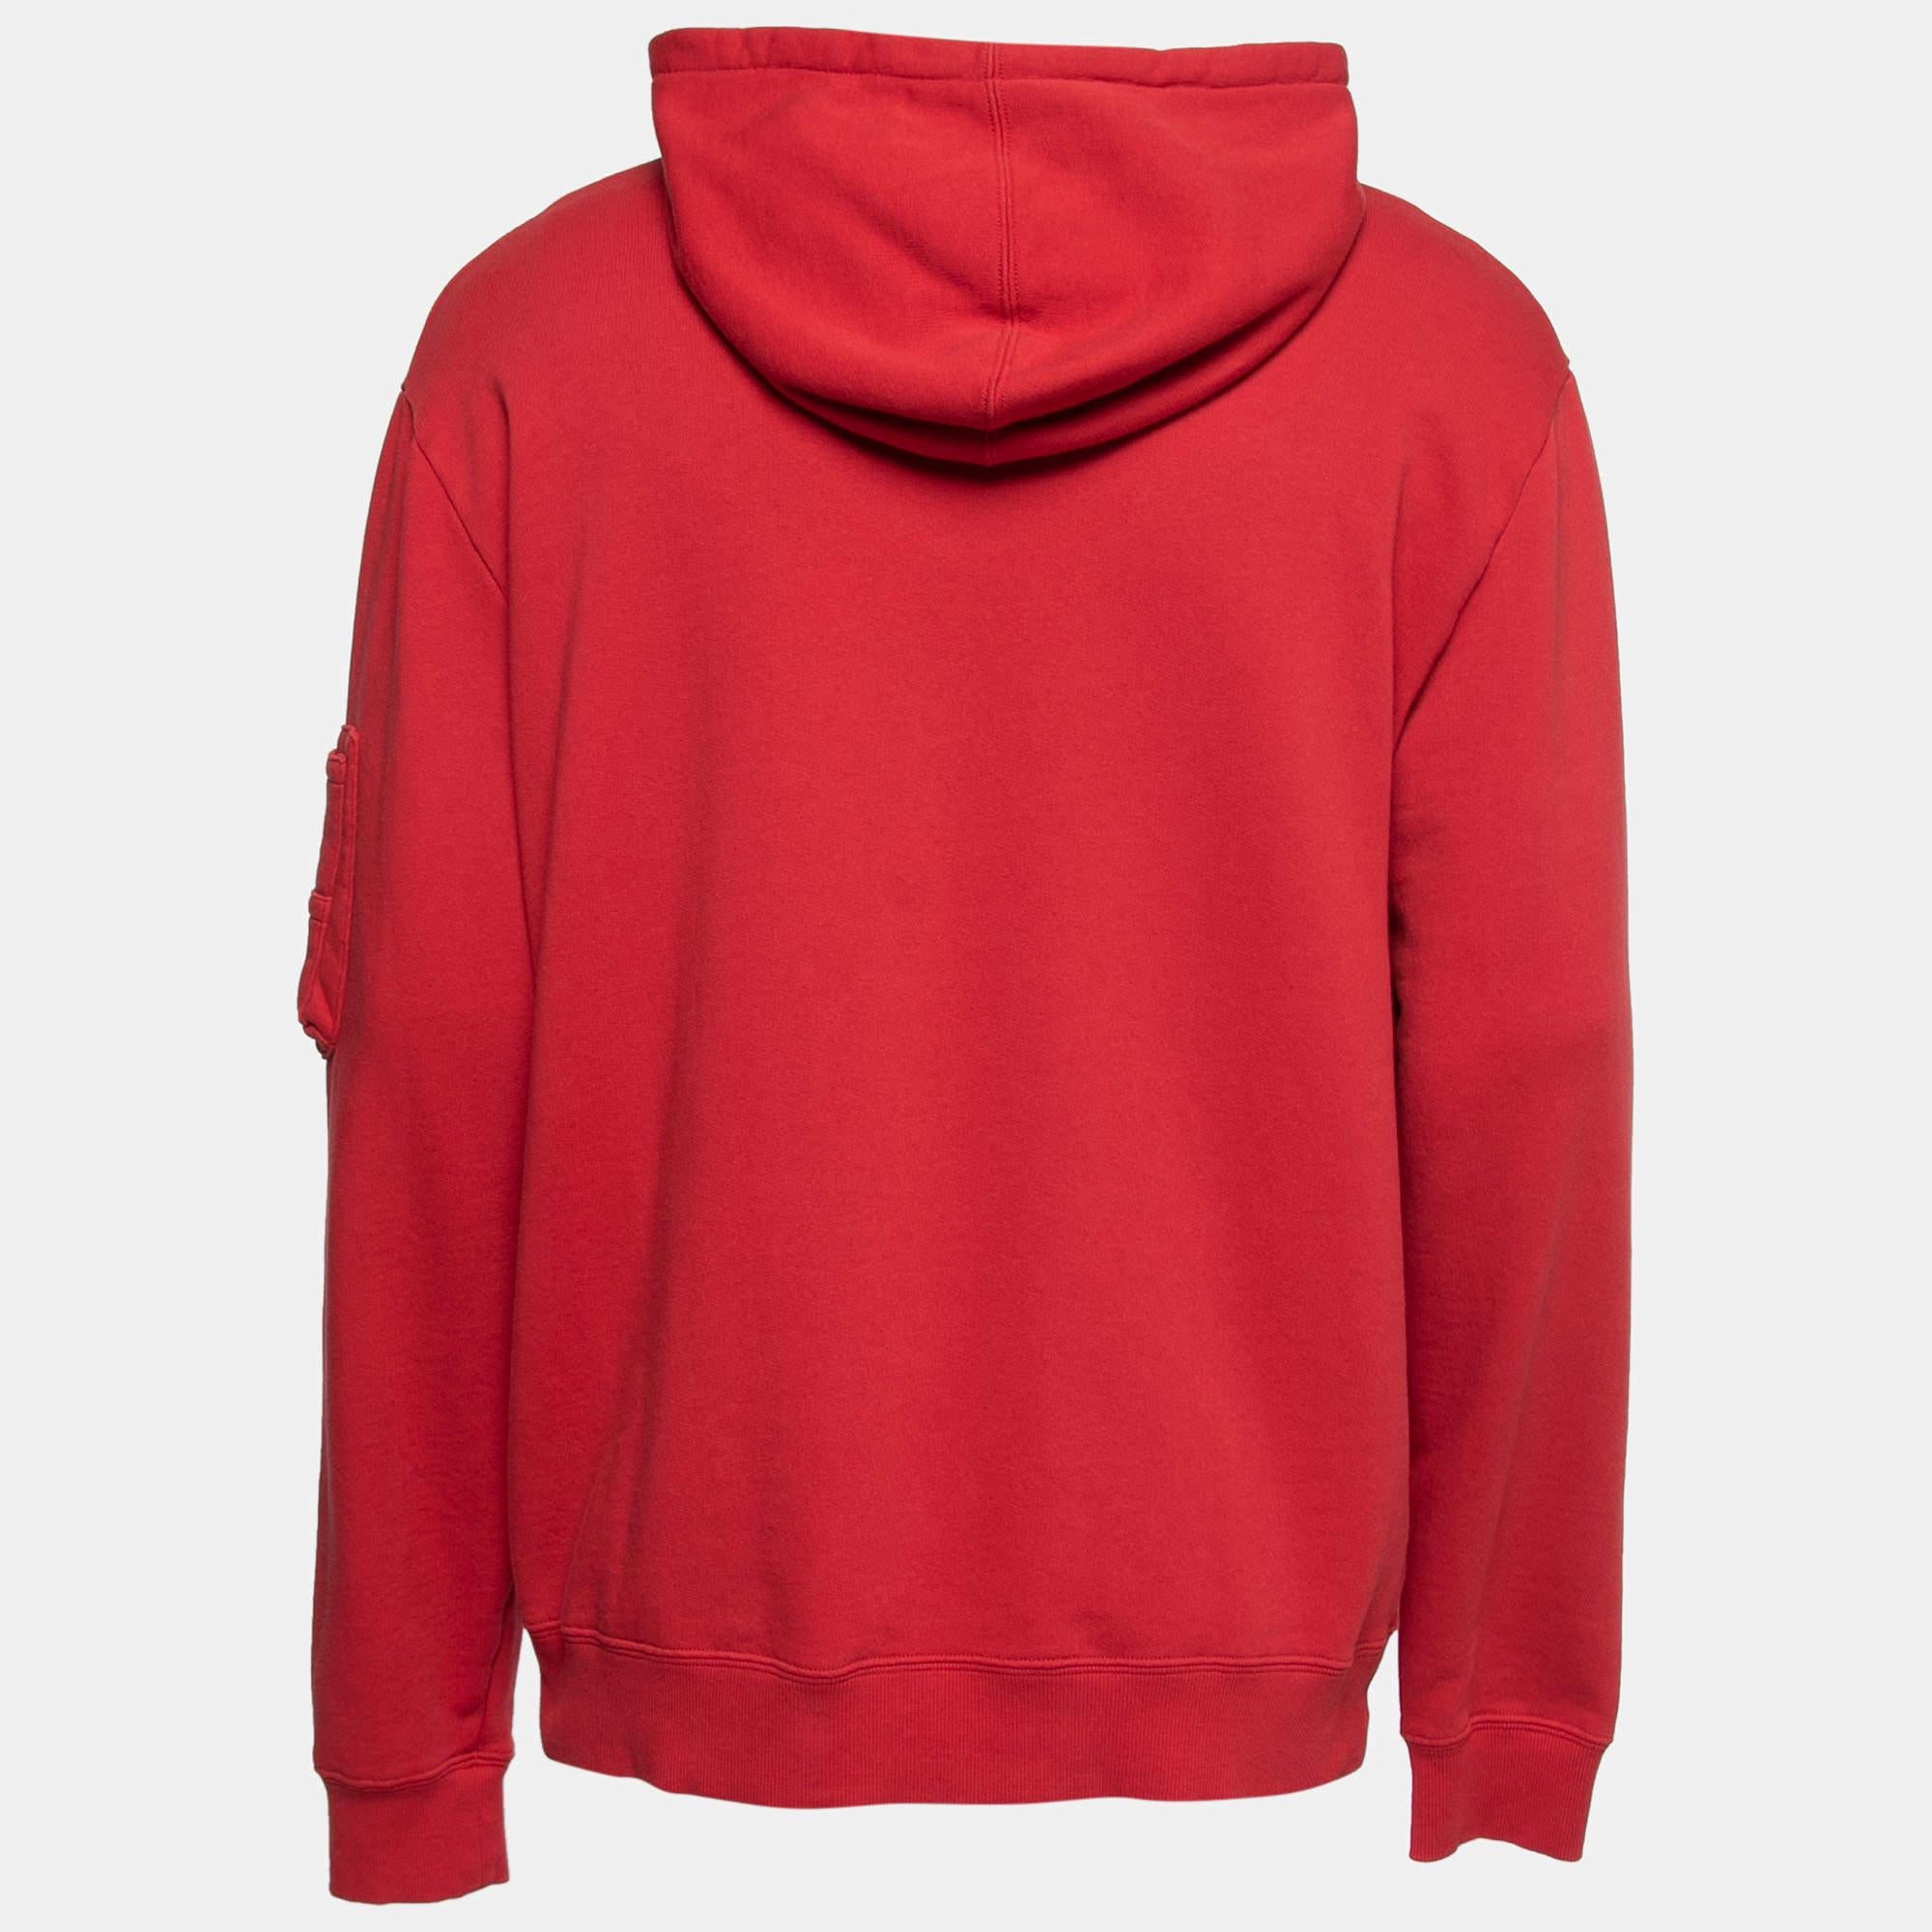 This red hoodie from Saint Laurent is simple and just the right choice for your casual style. It is made from cotton and designed with a hoodie and long sleeves. Team it with denim and high-top sneakers for a cool look.

